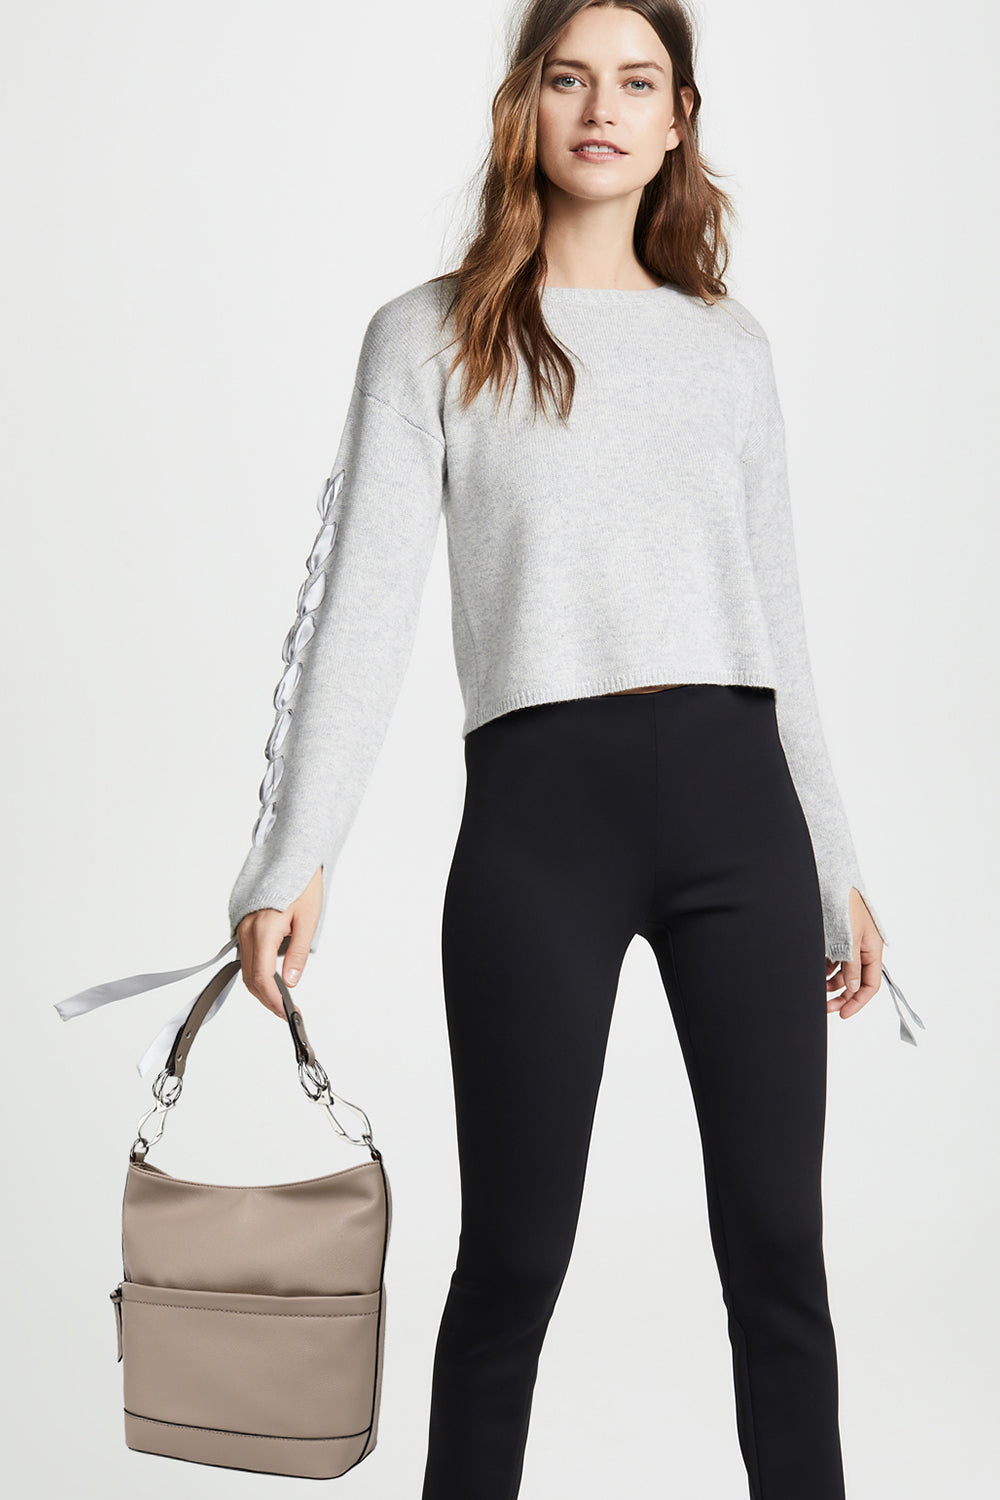 Slouchy hobo with front zip pocket and claw hw